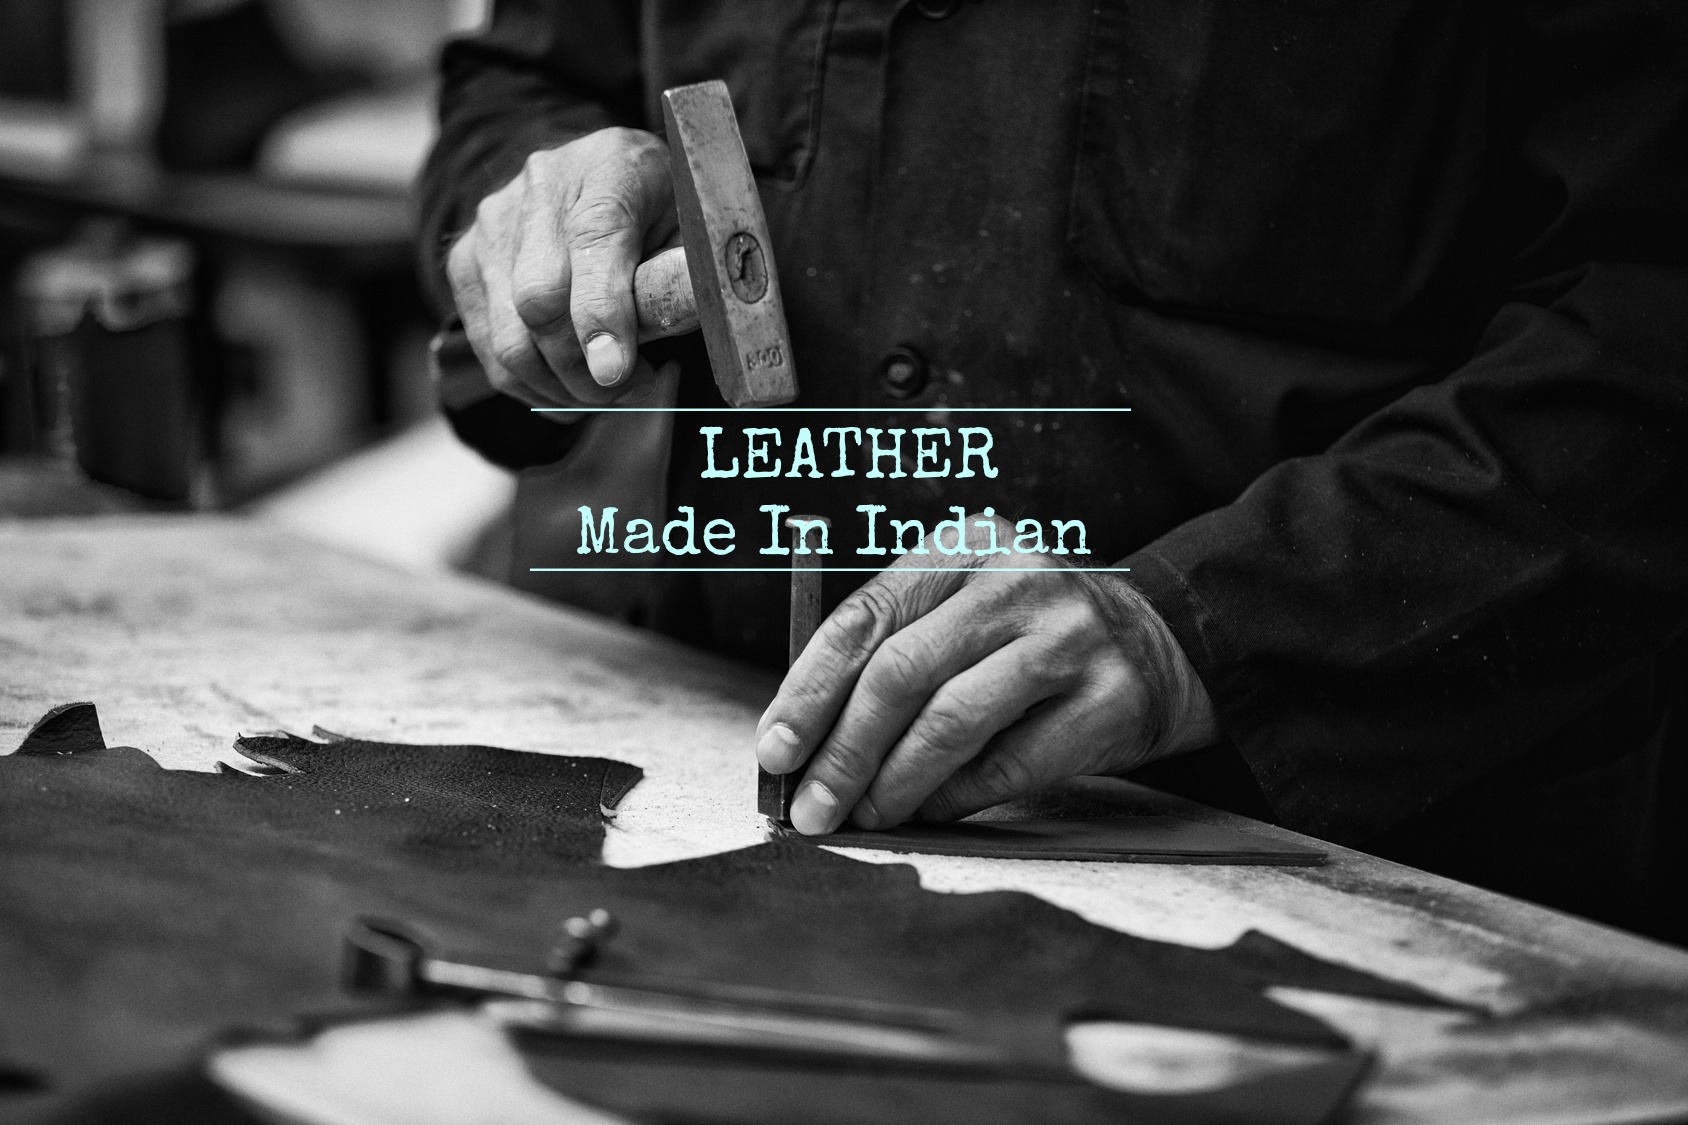 Maker of leather bags